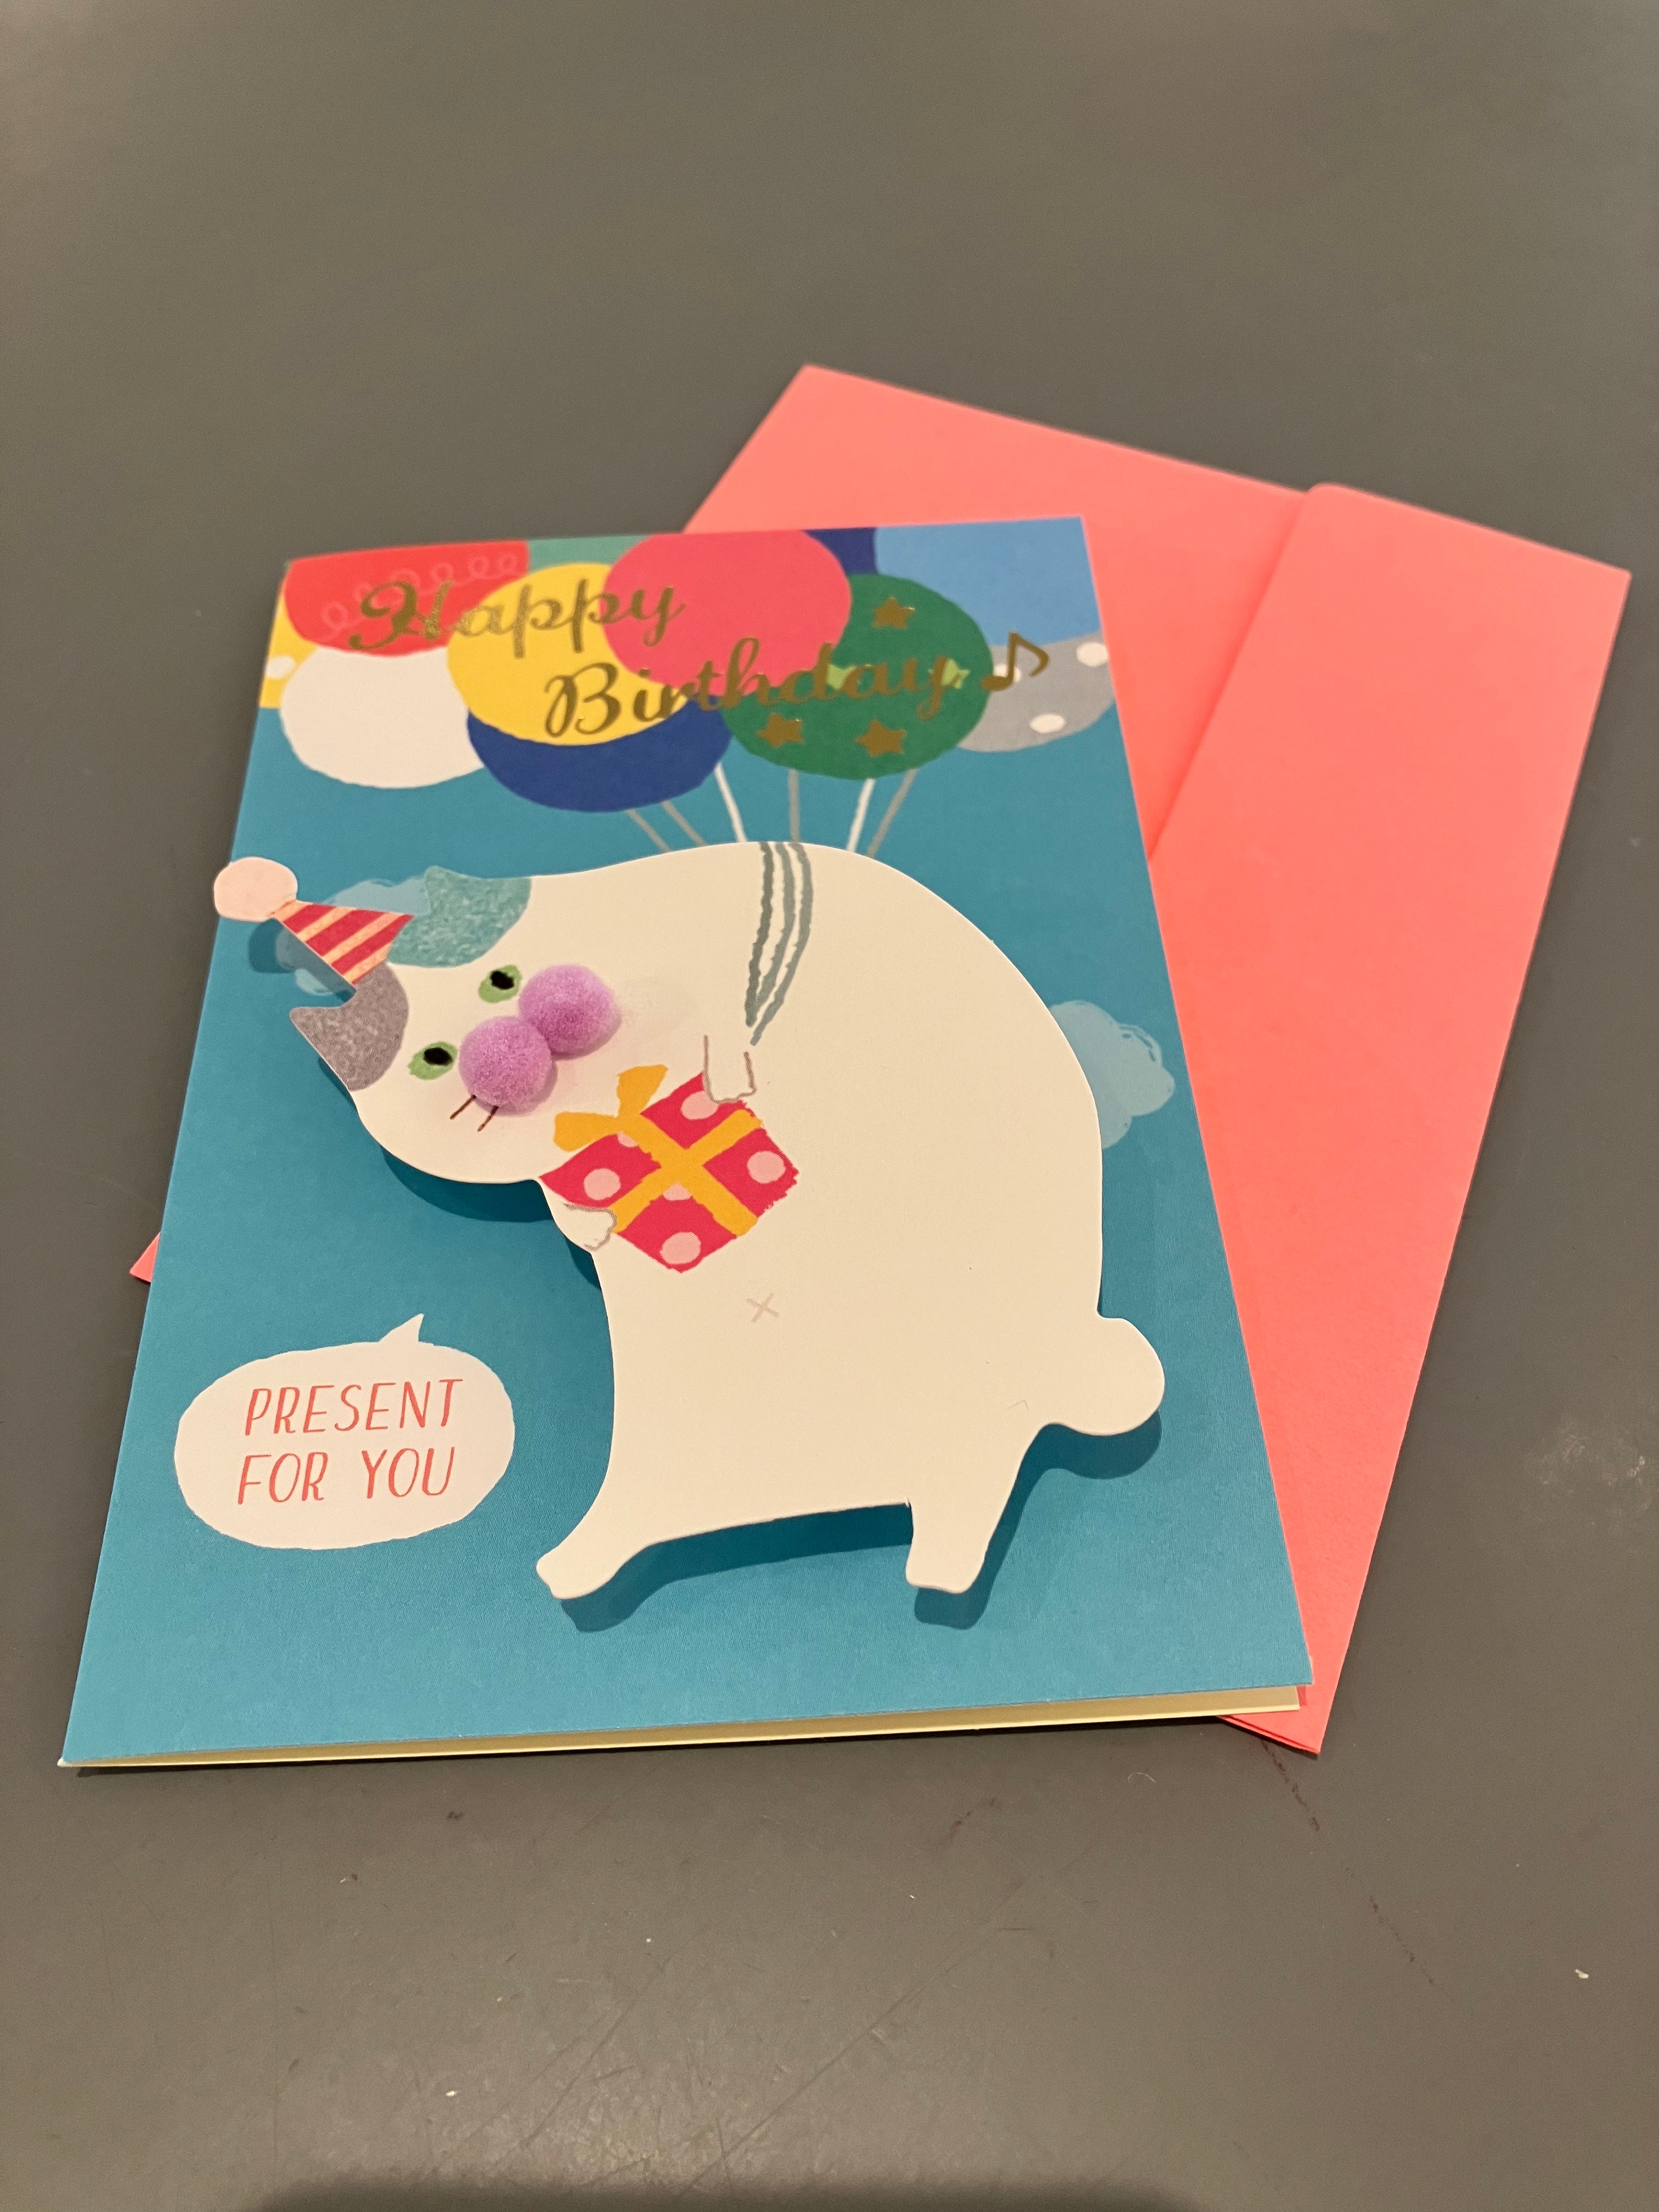 Pop-up birthday card with cat floating in balloons